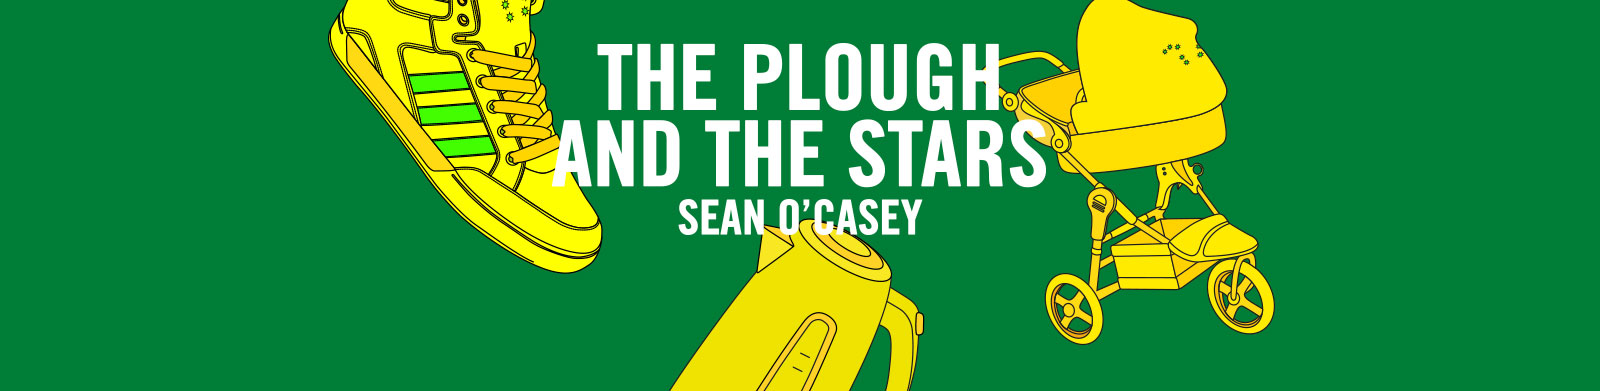 The Plough and the Stars banner